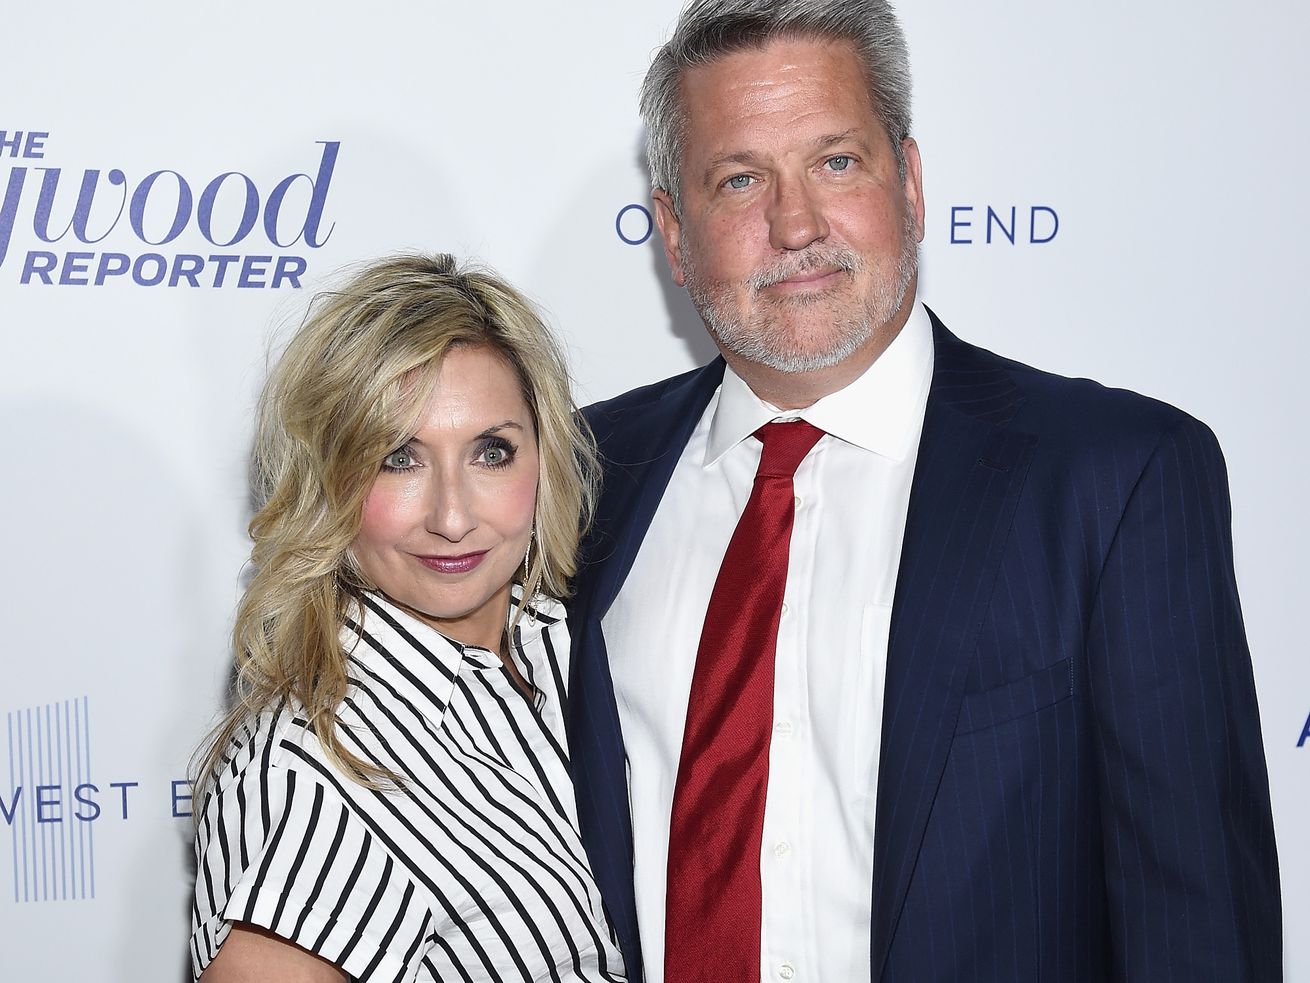 Bill Shine covered up sexual harassment at Fox News for decades until the plot blew up in his face